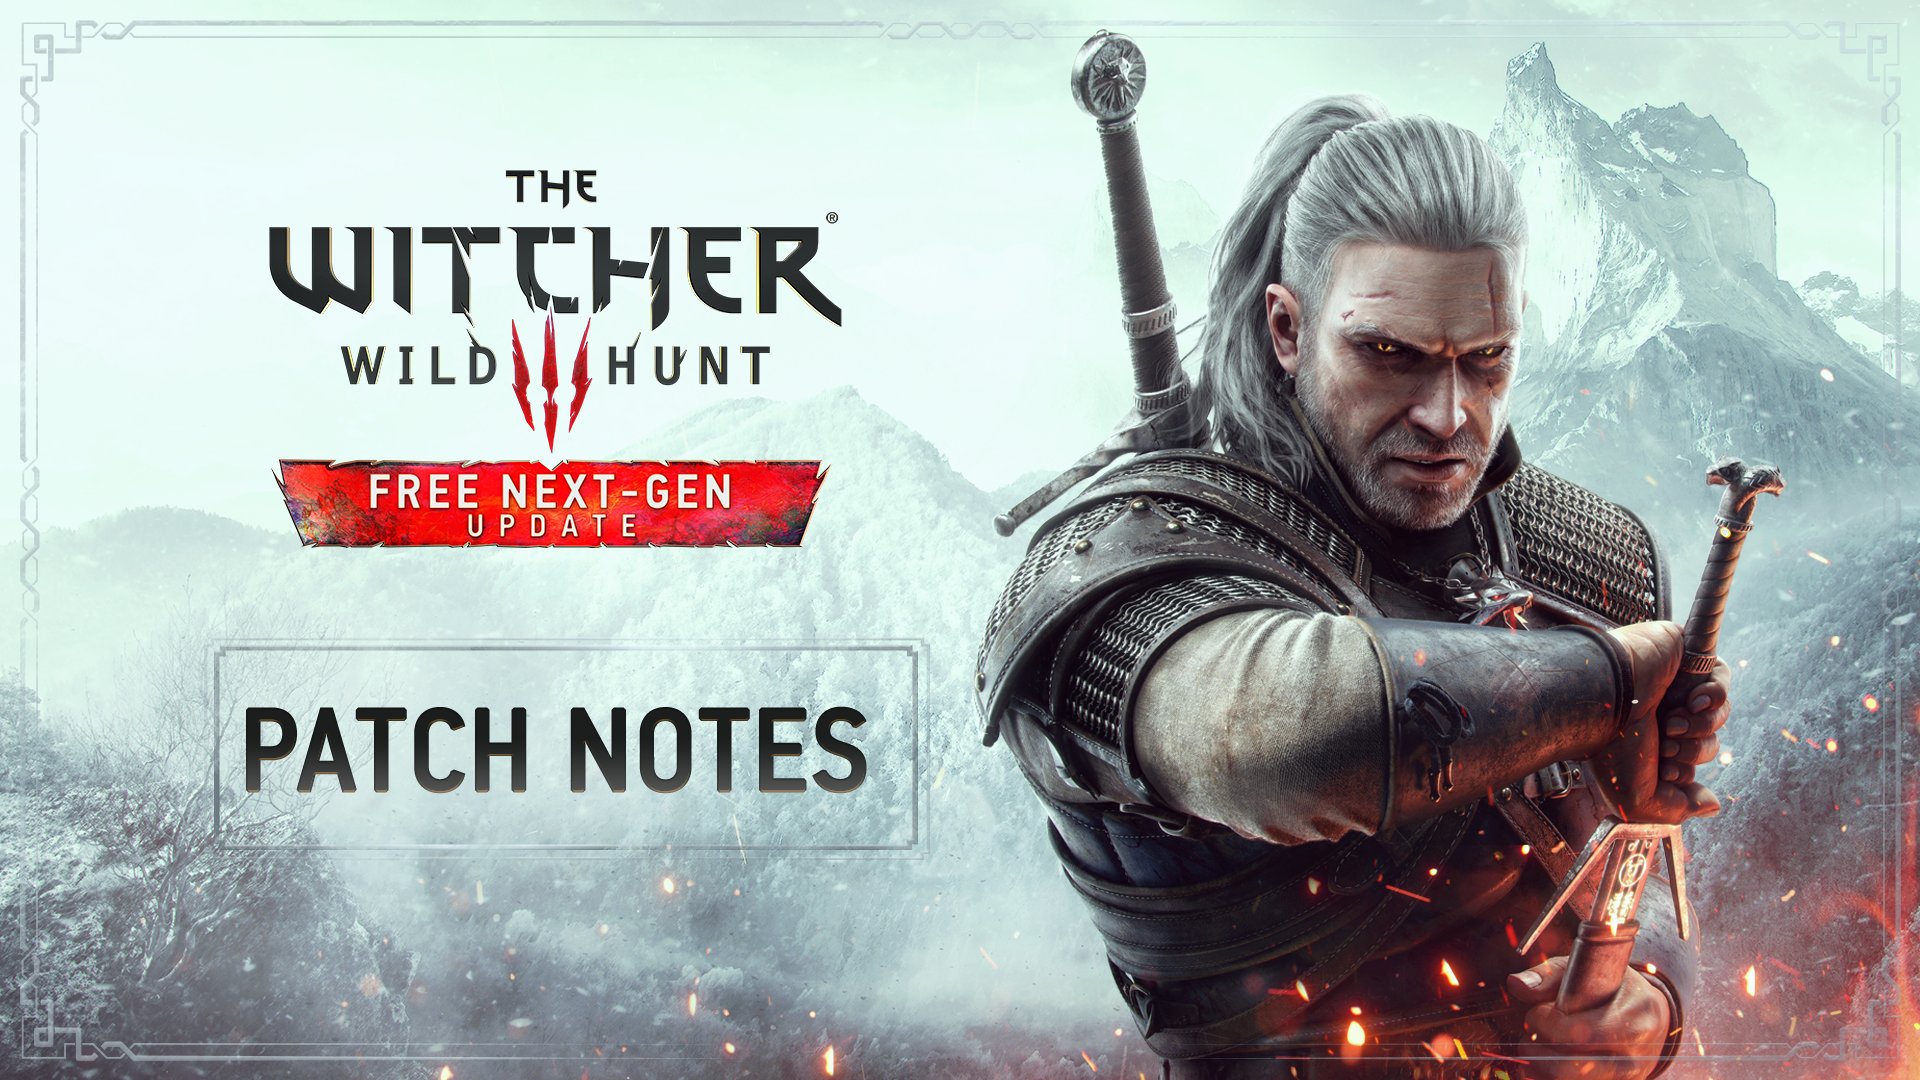 The Witcher on Twitter: "The free next-gen patch notes are here! Check out coming to The Witcher 3: Wild Hunt on PC, and Xbox Series X|S on December